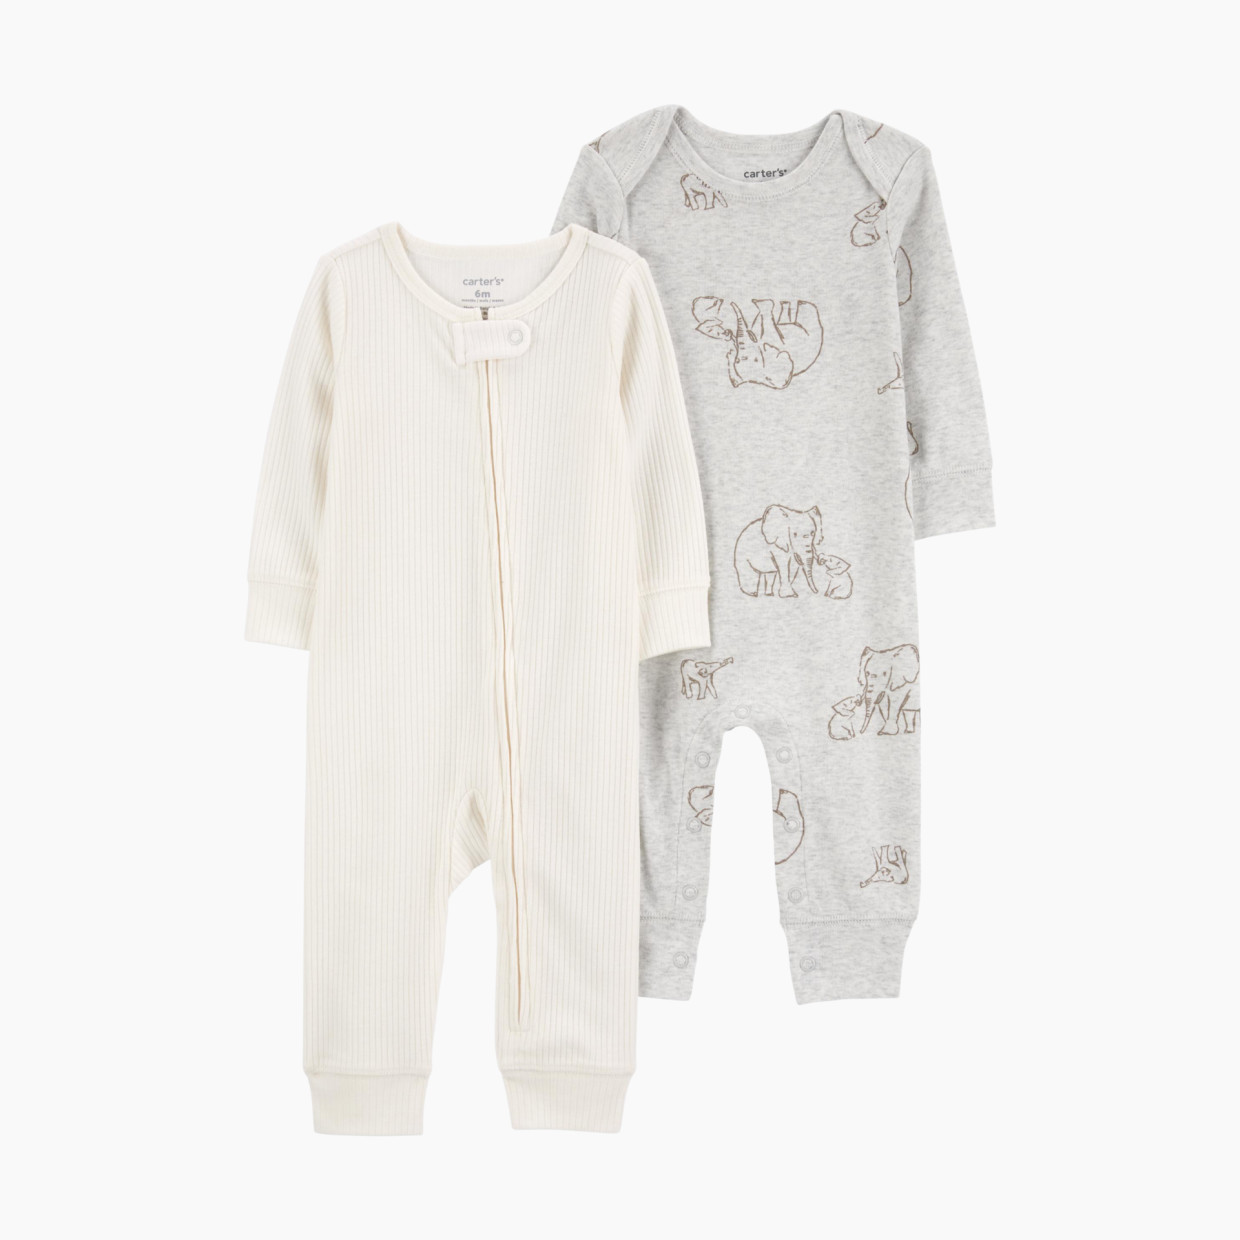 Carter's 2-Pack Jumpsuits - Grey/White, 3 M.